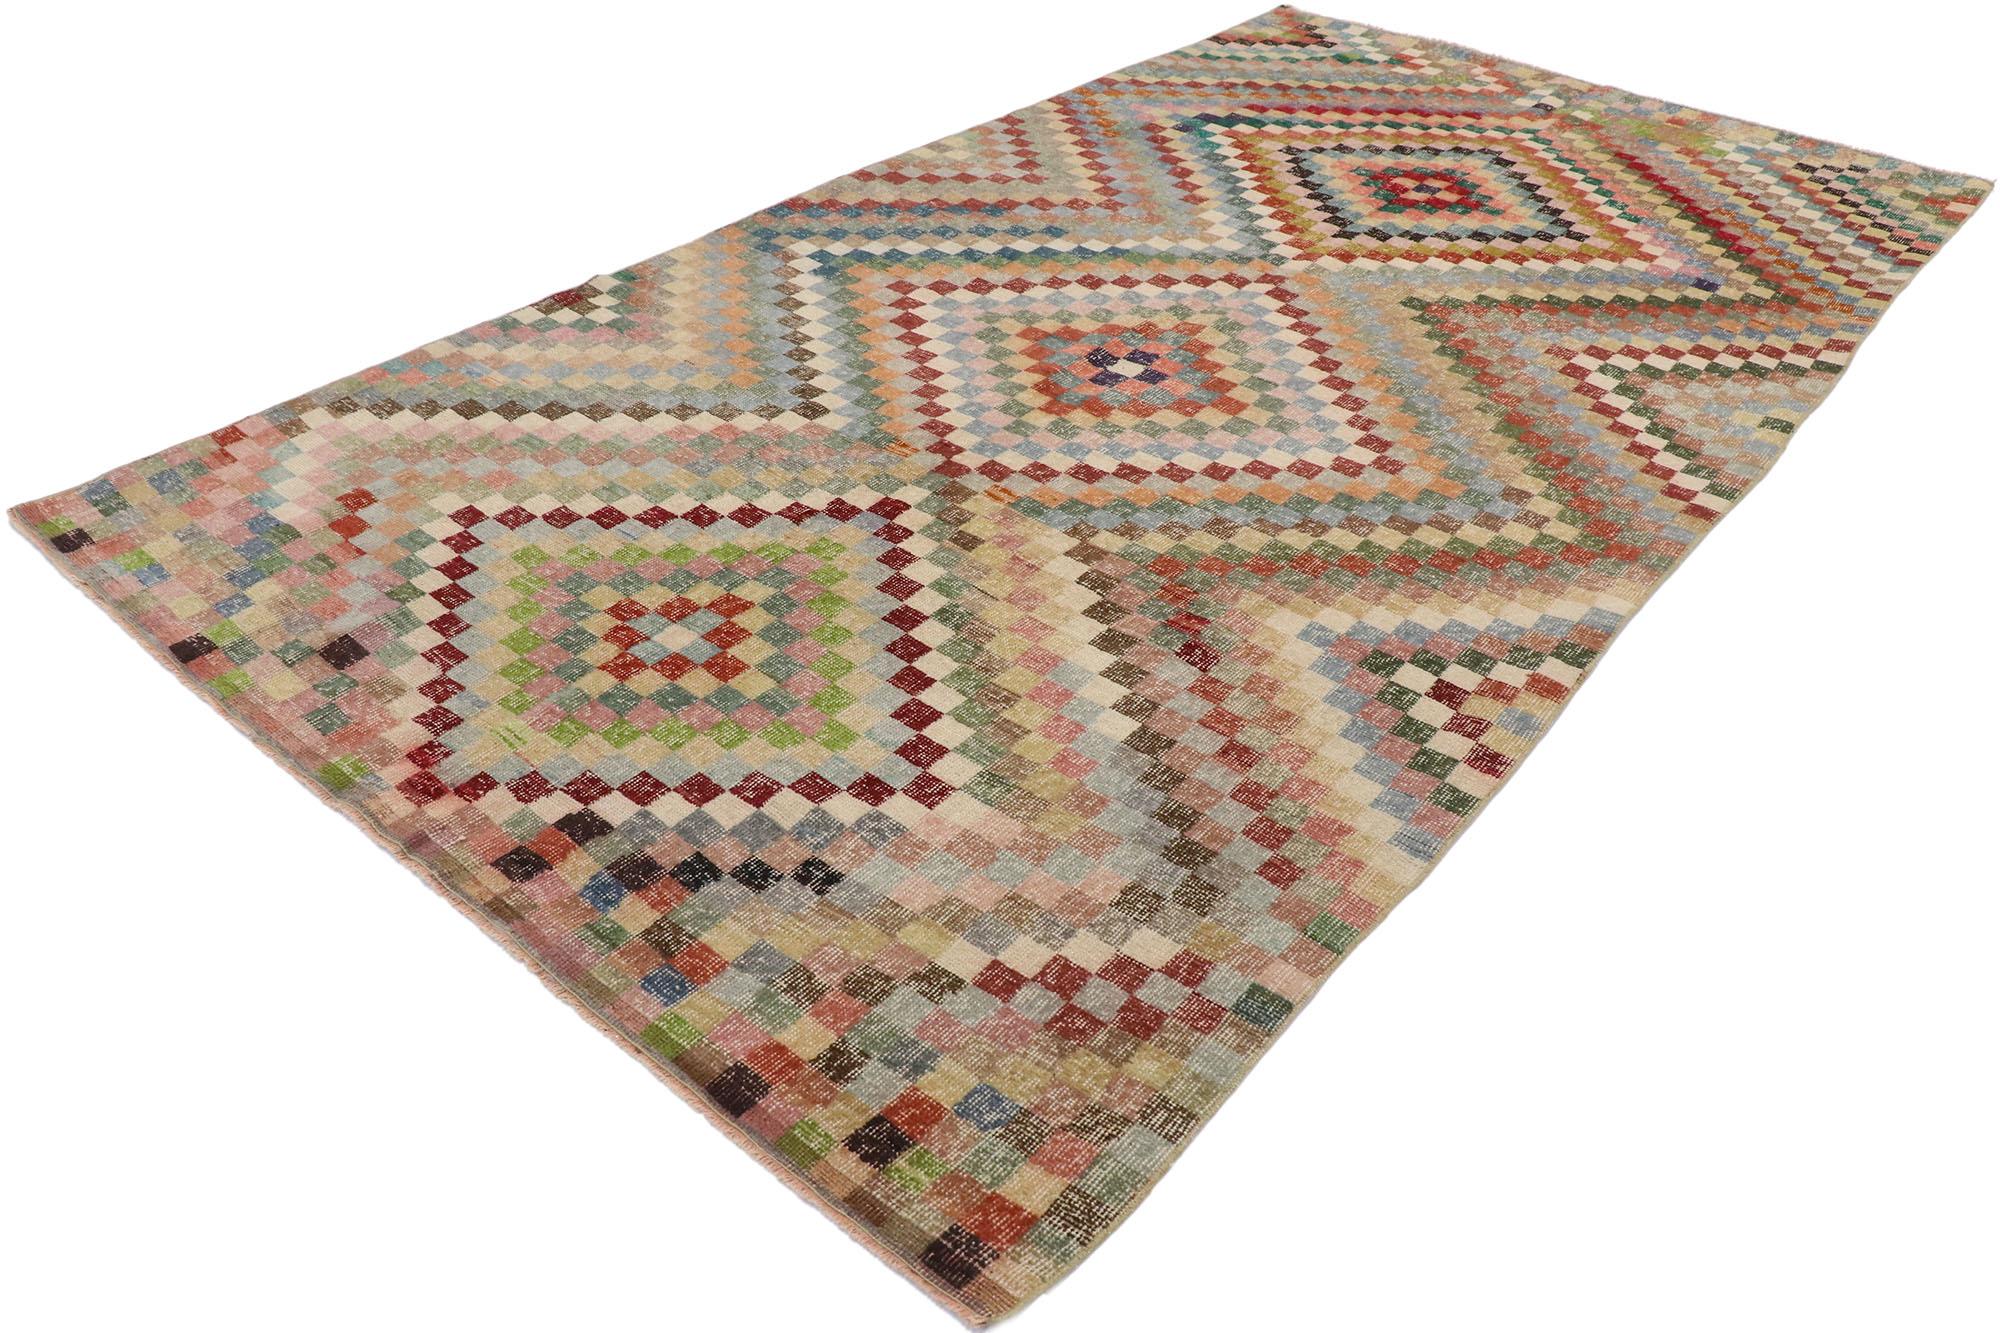 53299, distressed vintage Turkish Sivas rug with Mid-Century Modern Rustic style. This hand knotted wool distressed vintage Turkish Sivas runner features an all-over checkered stacked diamond pattern comprised of rows of multicolored cubes. Each row